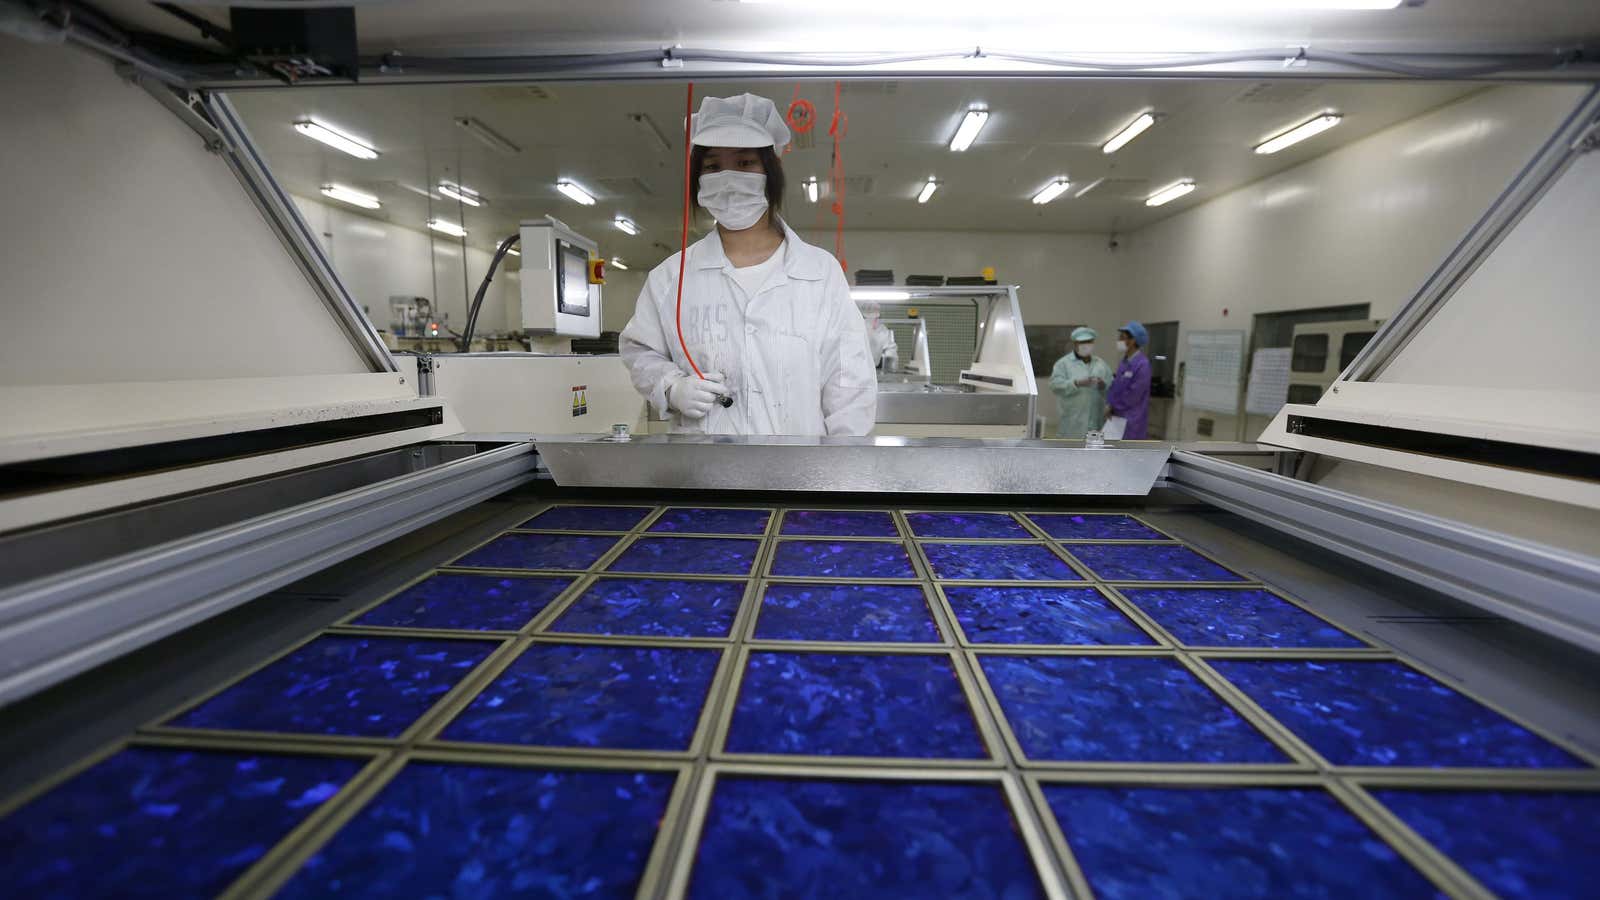 Solar panel producers in China have rolled back exports to the US because of steep tariffs.